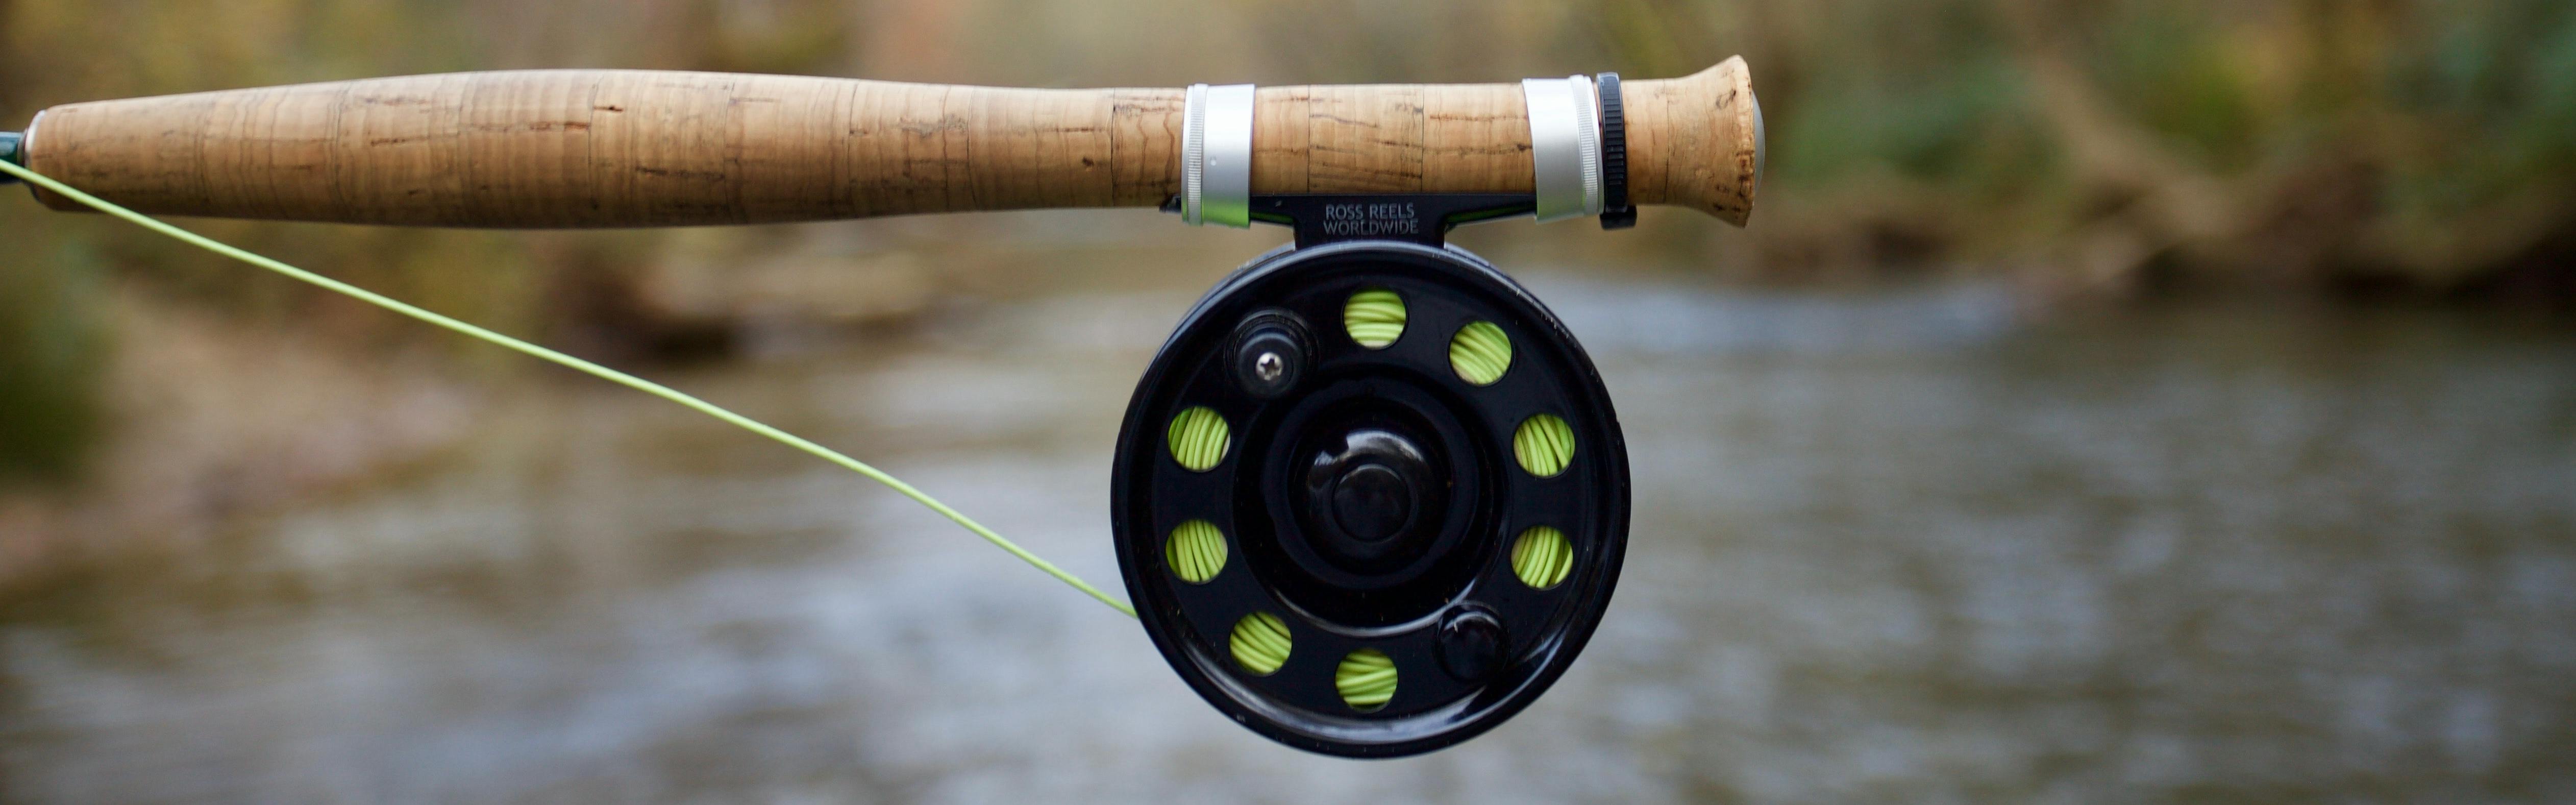  Fly Fishing Reels - Used / Fly Fishing Reels / Fly Fishing  Equipment: Sports & Outdoors